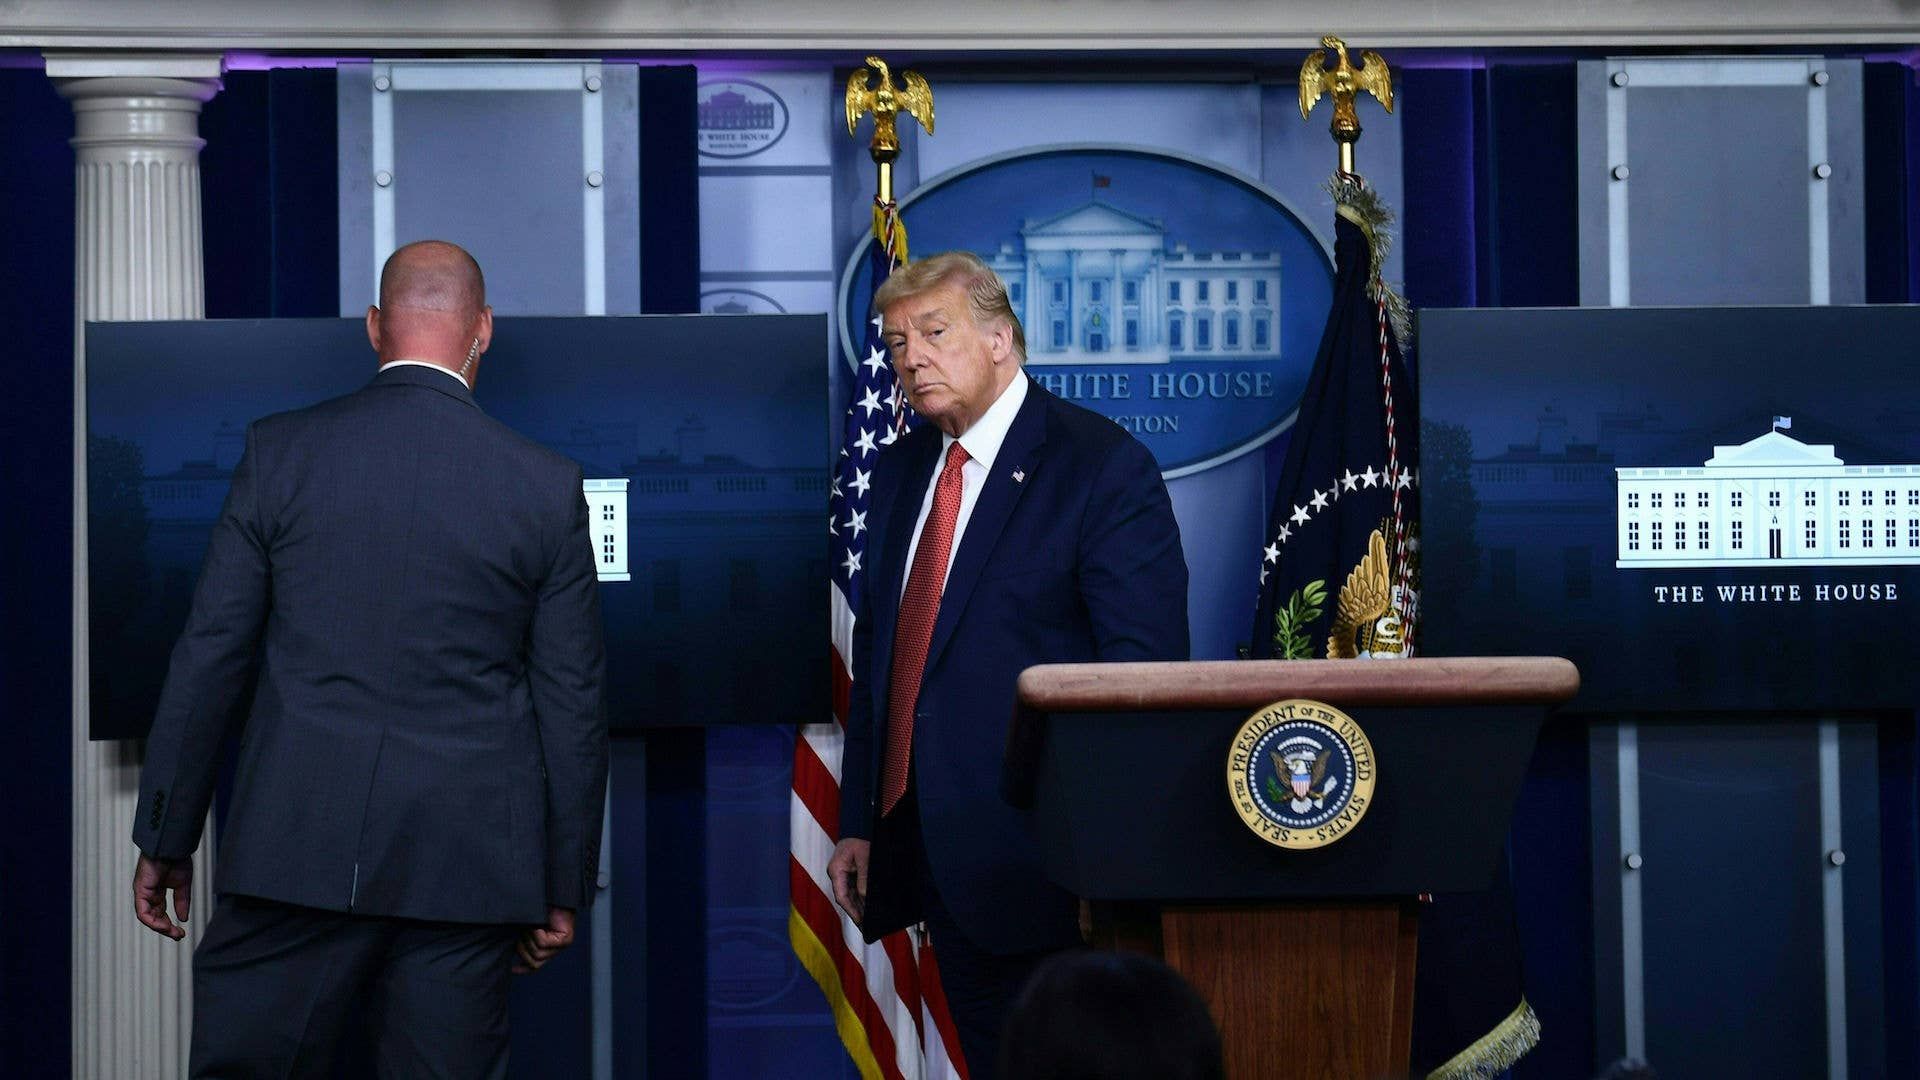 Donald Trump is being removed by secret service member from the Brady Briefing Room of White House.